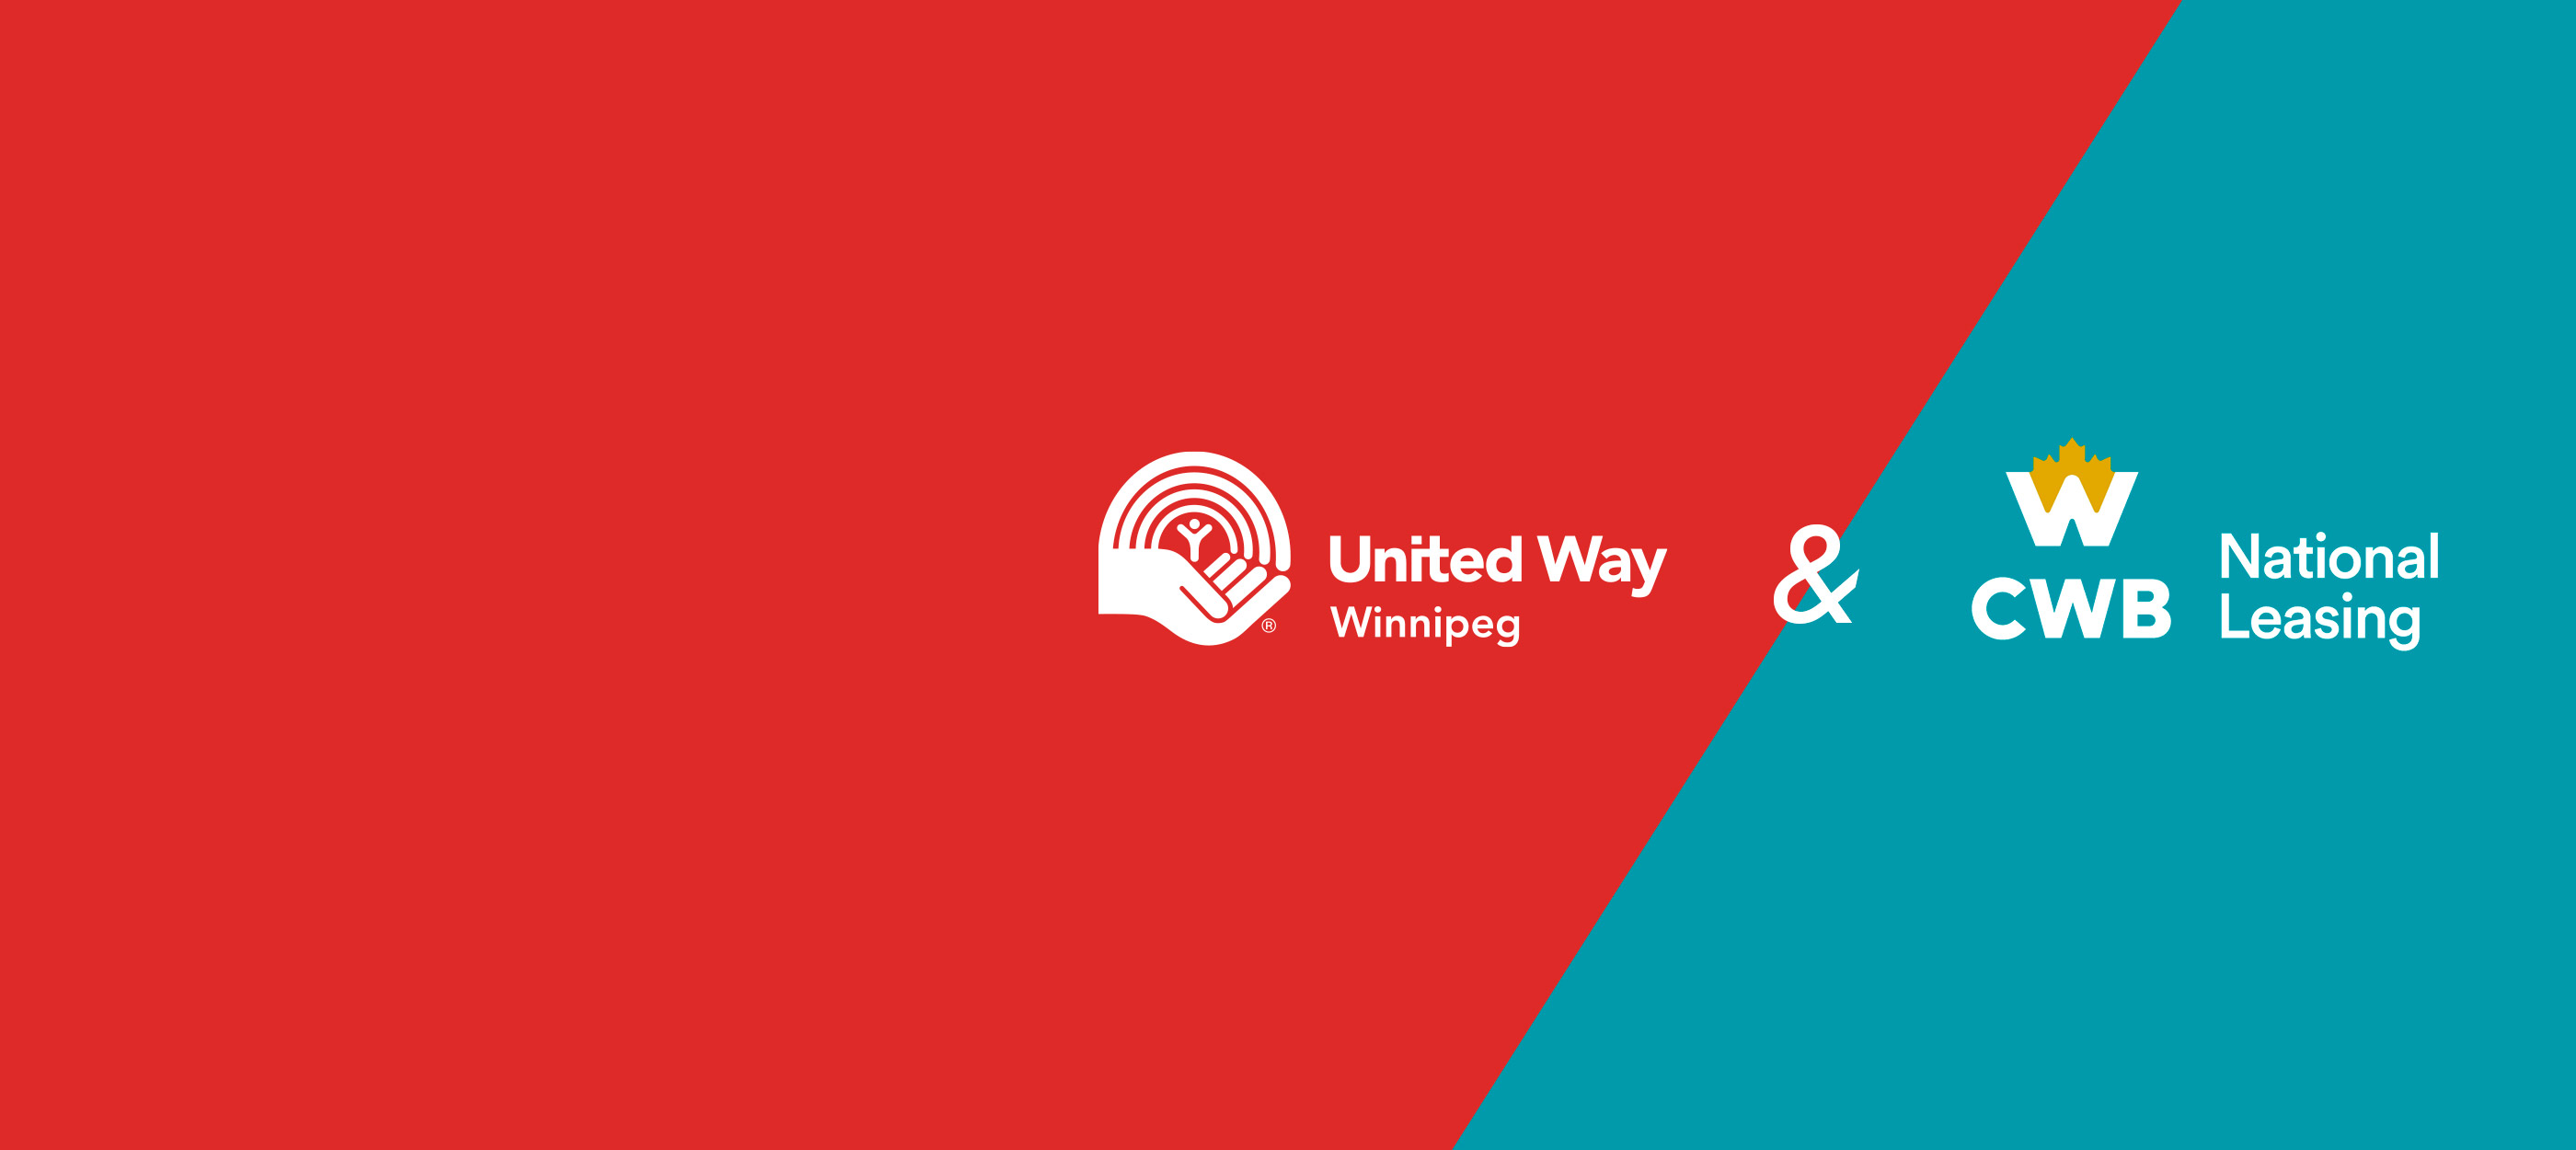 CWB employees participating in United way events, with co-branded United way and NL logos